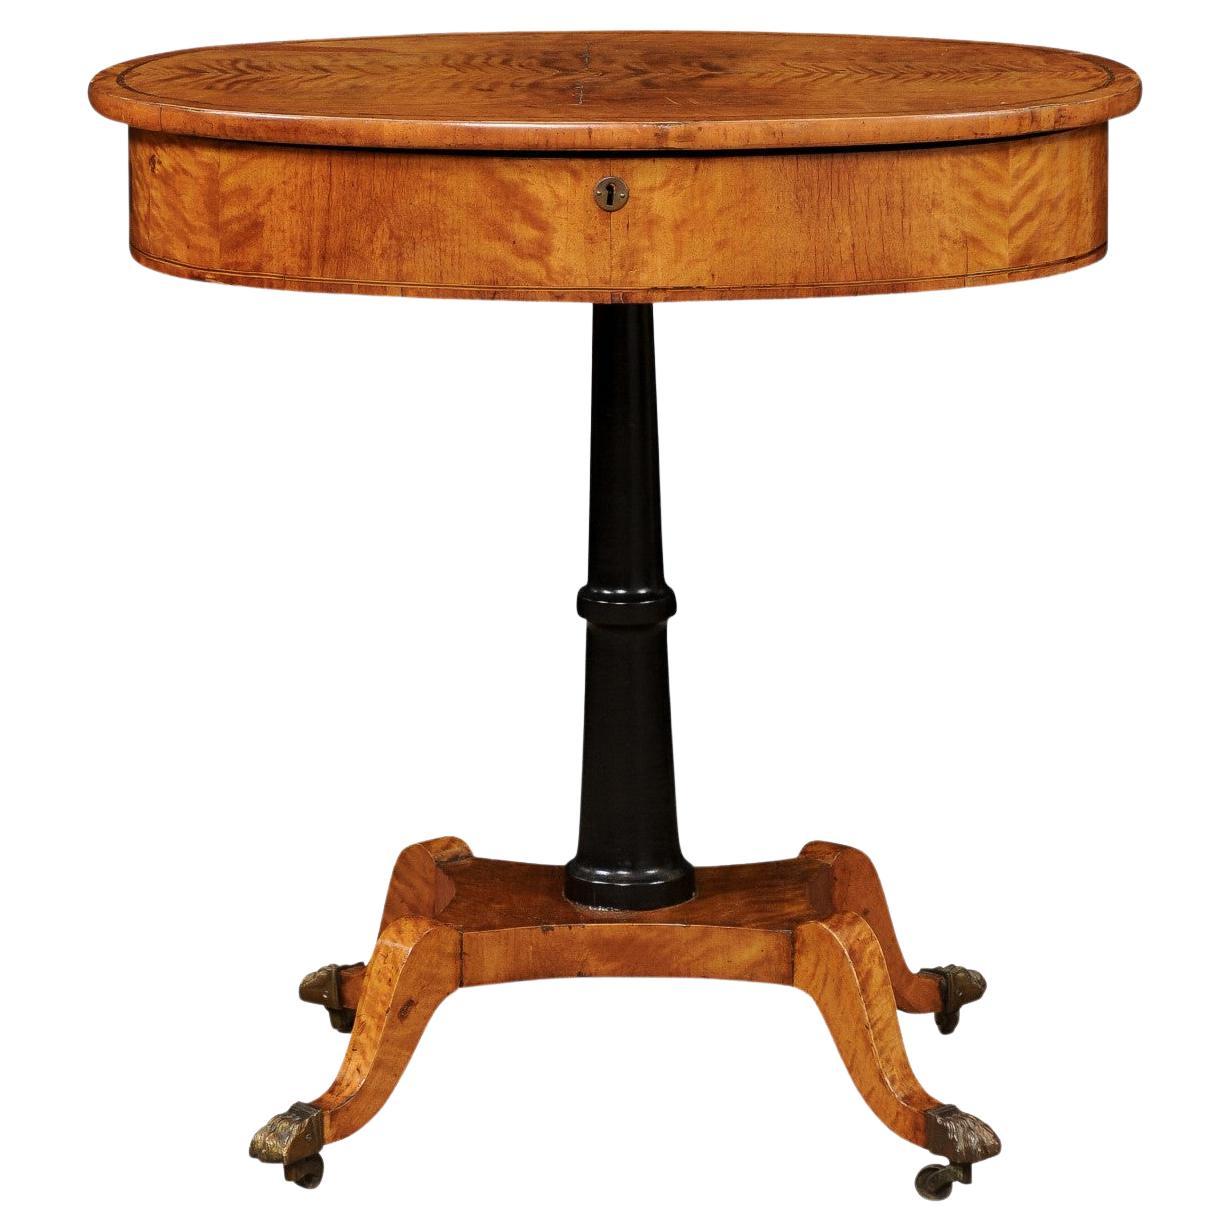 Early 19th Century English Regency Satinwood & Ebonized Oval Work Table For Sale